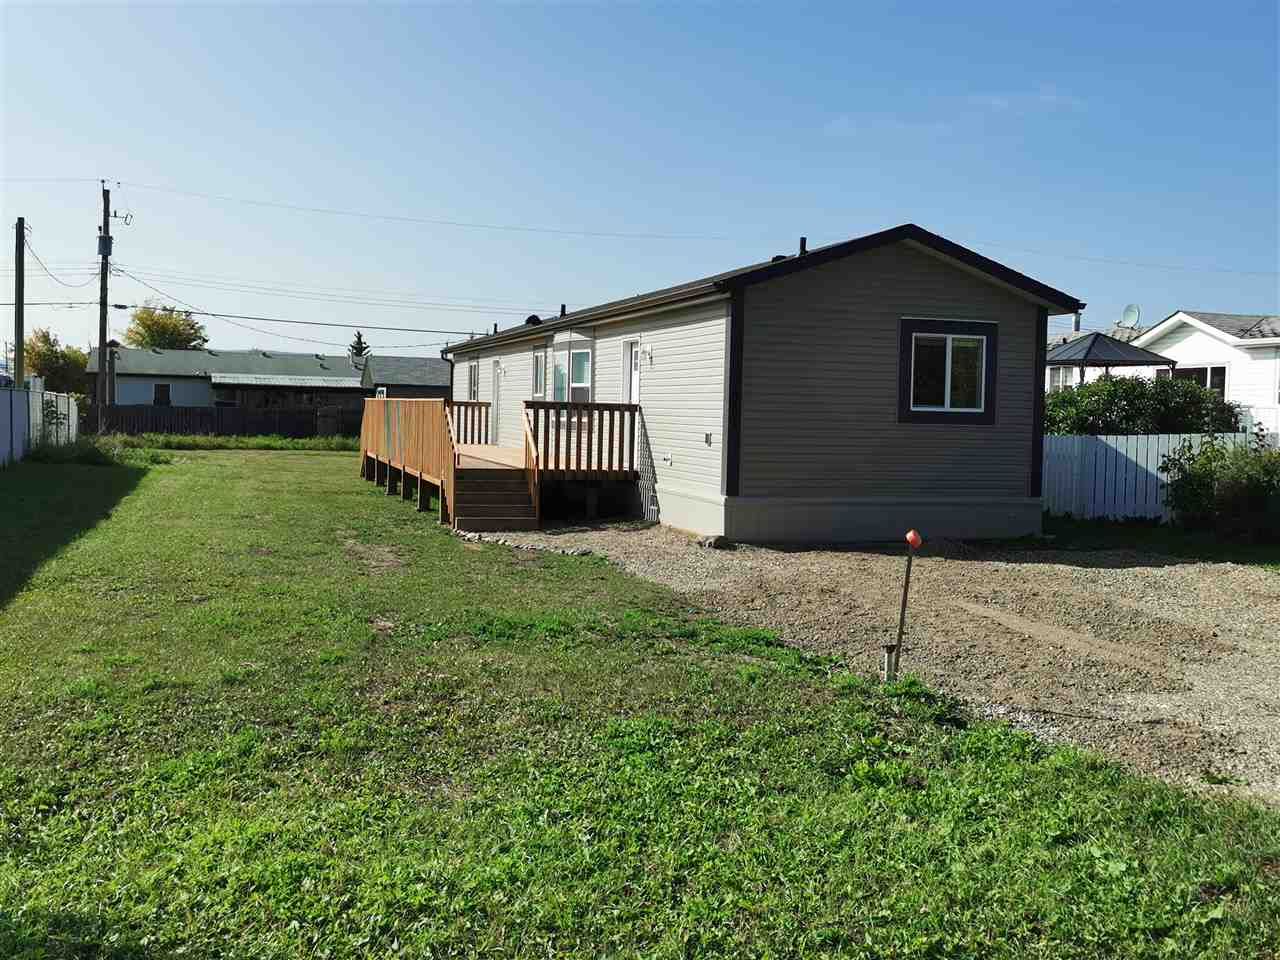 Main Photo: 10464 98 Street: Taylor Manufactured Home for sale (Fort St. John (Zone 60))  : MLS®# R2499625